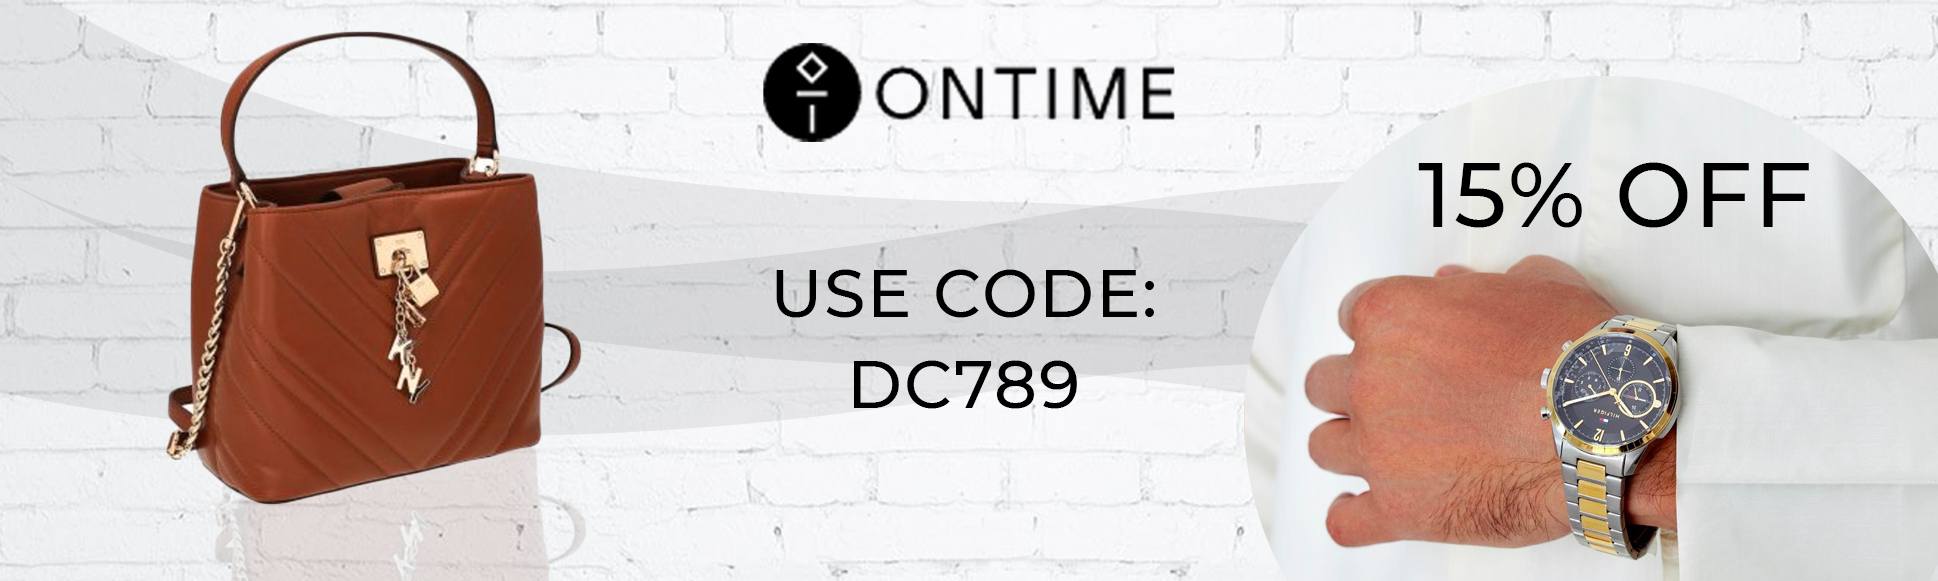 Ontime Kuwait Coupon Code